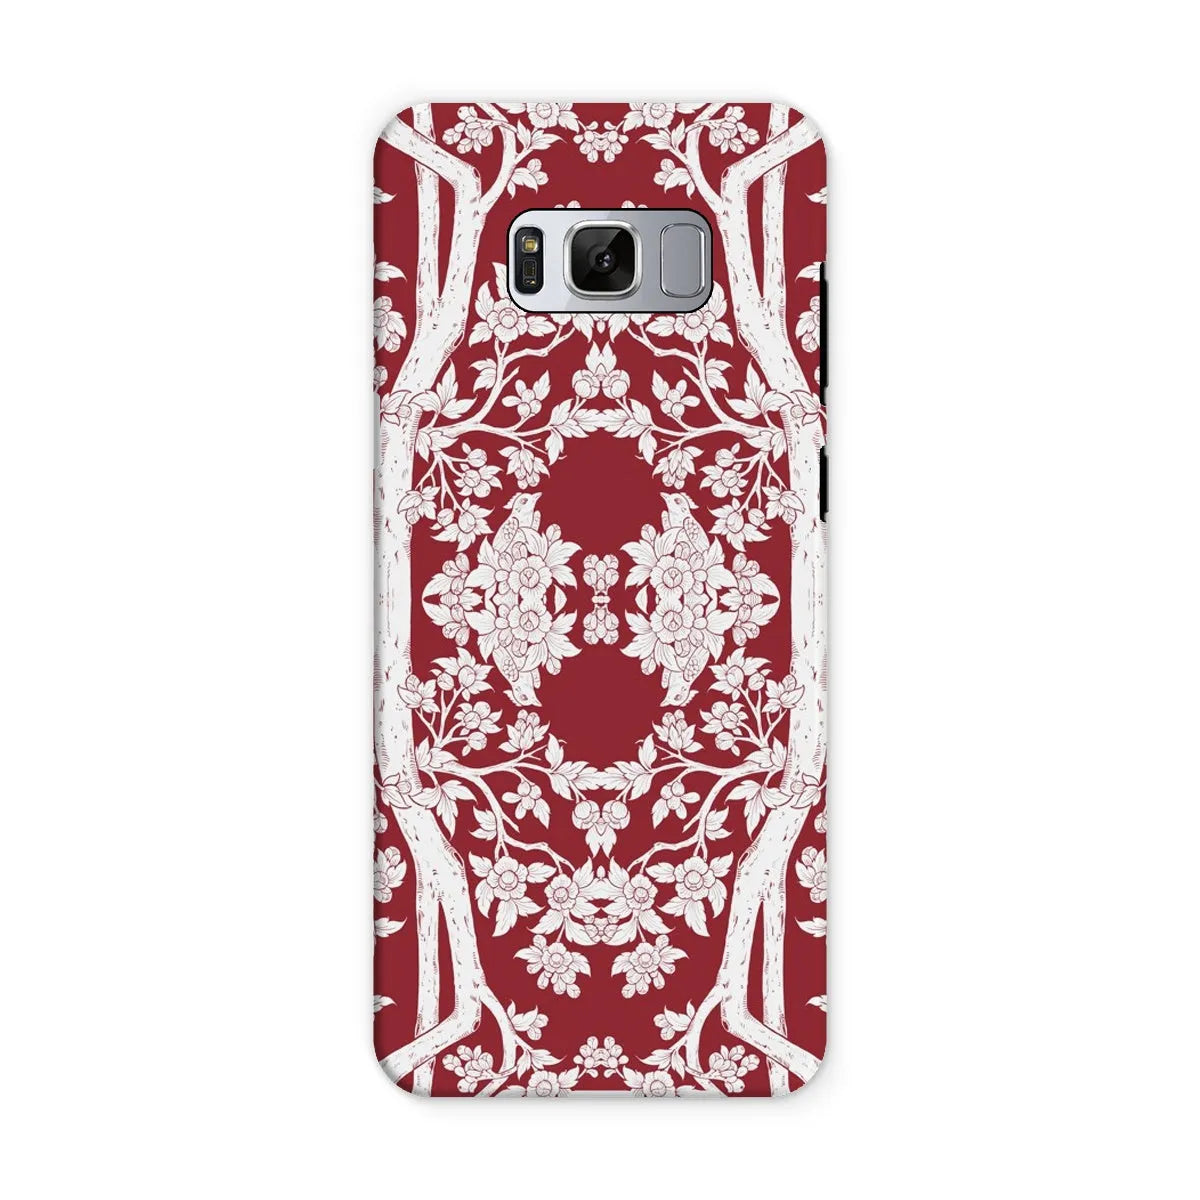 Aviary Red Aesthetic Pattern Art Phone Case - Samsung Galaxy S8 / Matte - Mobile Phone Cases - Aesthetic Art